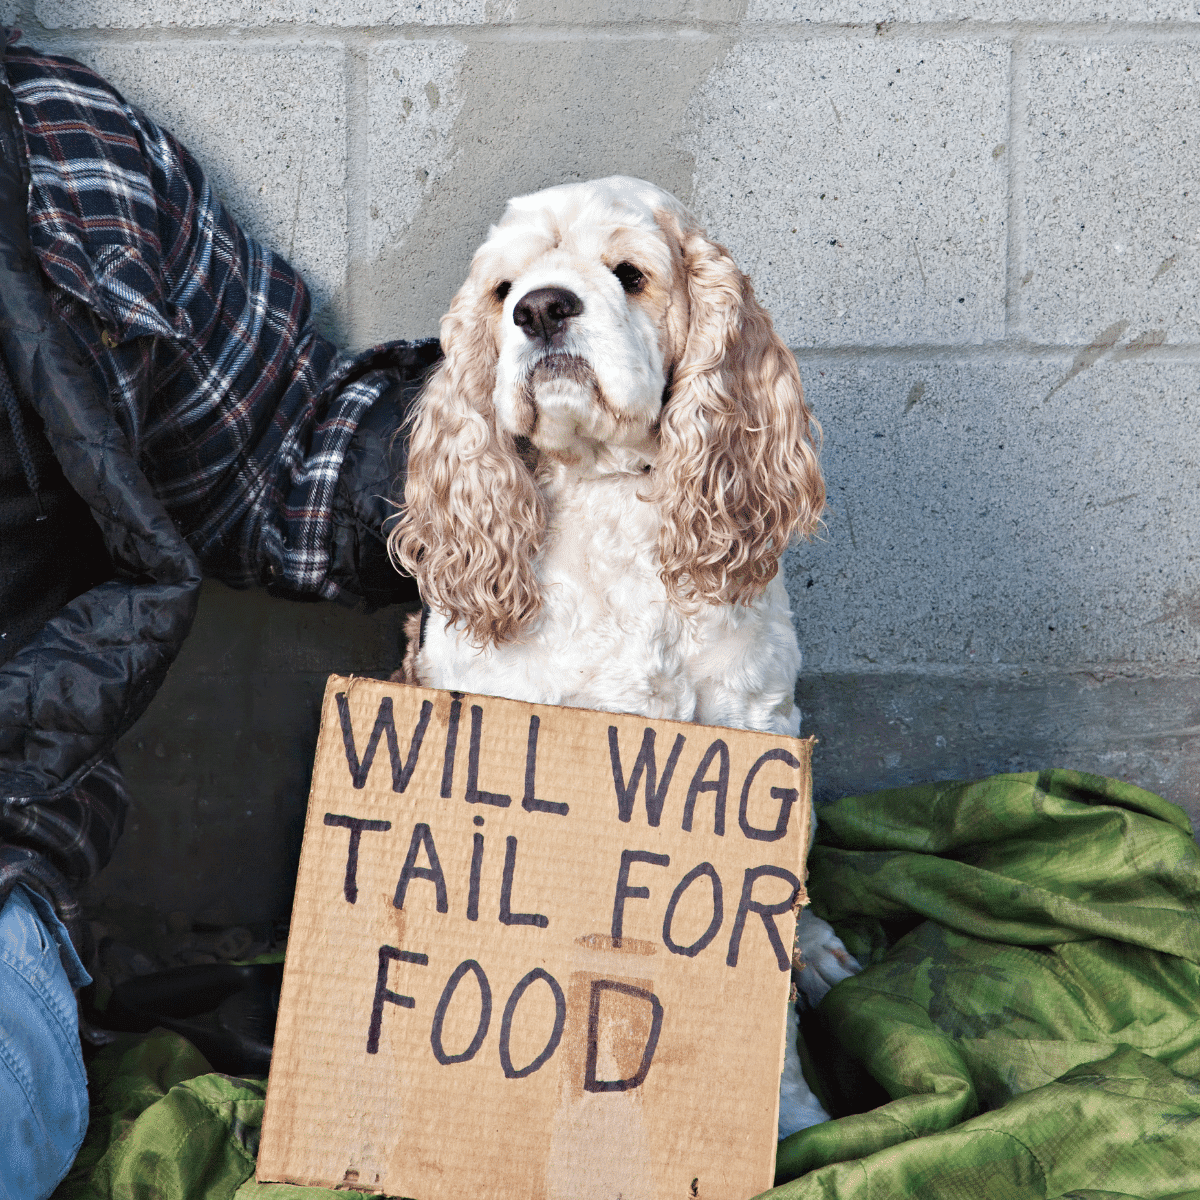 Spaniel dog with large bushy ears that is white and brown holding a sign will wag for food